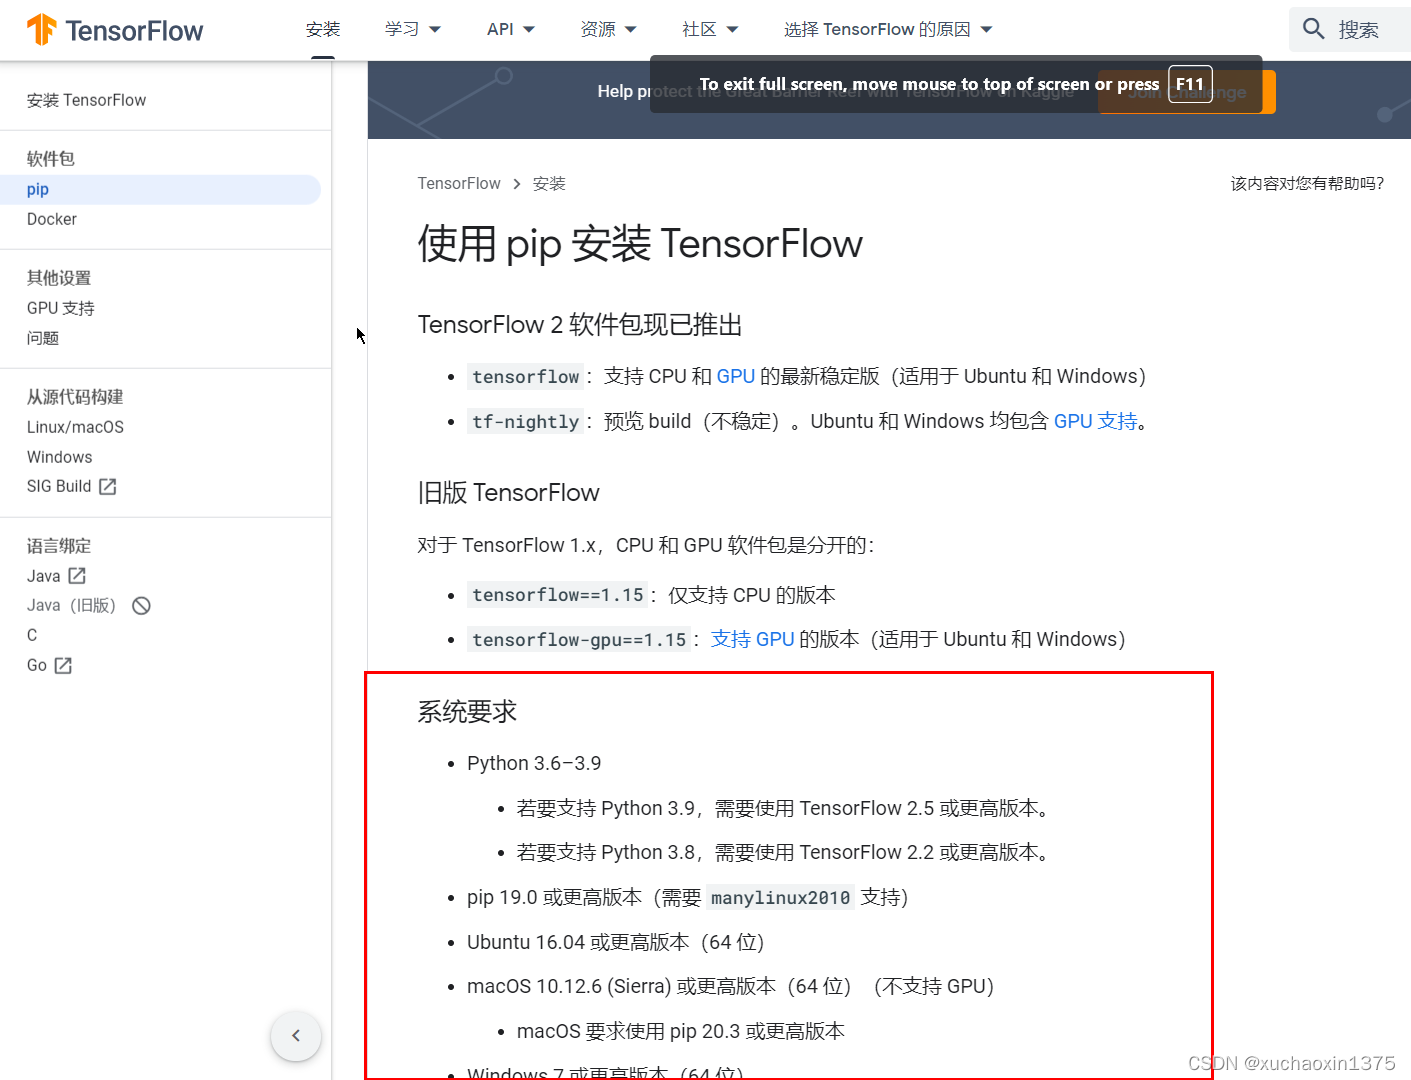 python_tensorflow安装失败:ERROR: Could not find a version that satisfies the requirement tensorflow